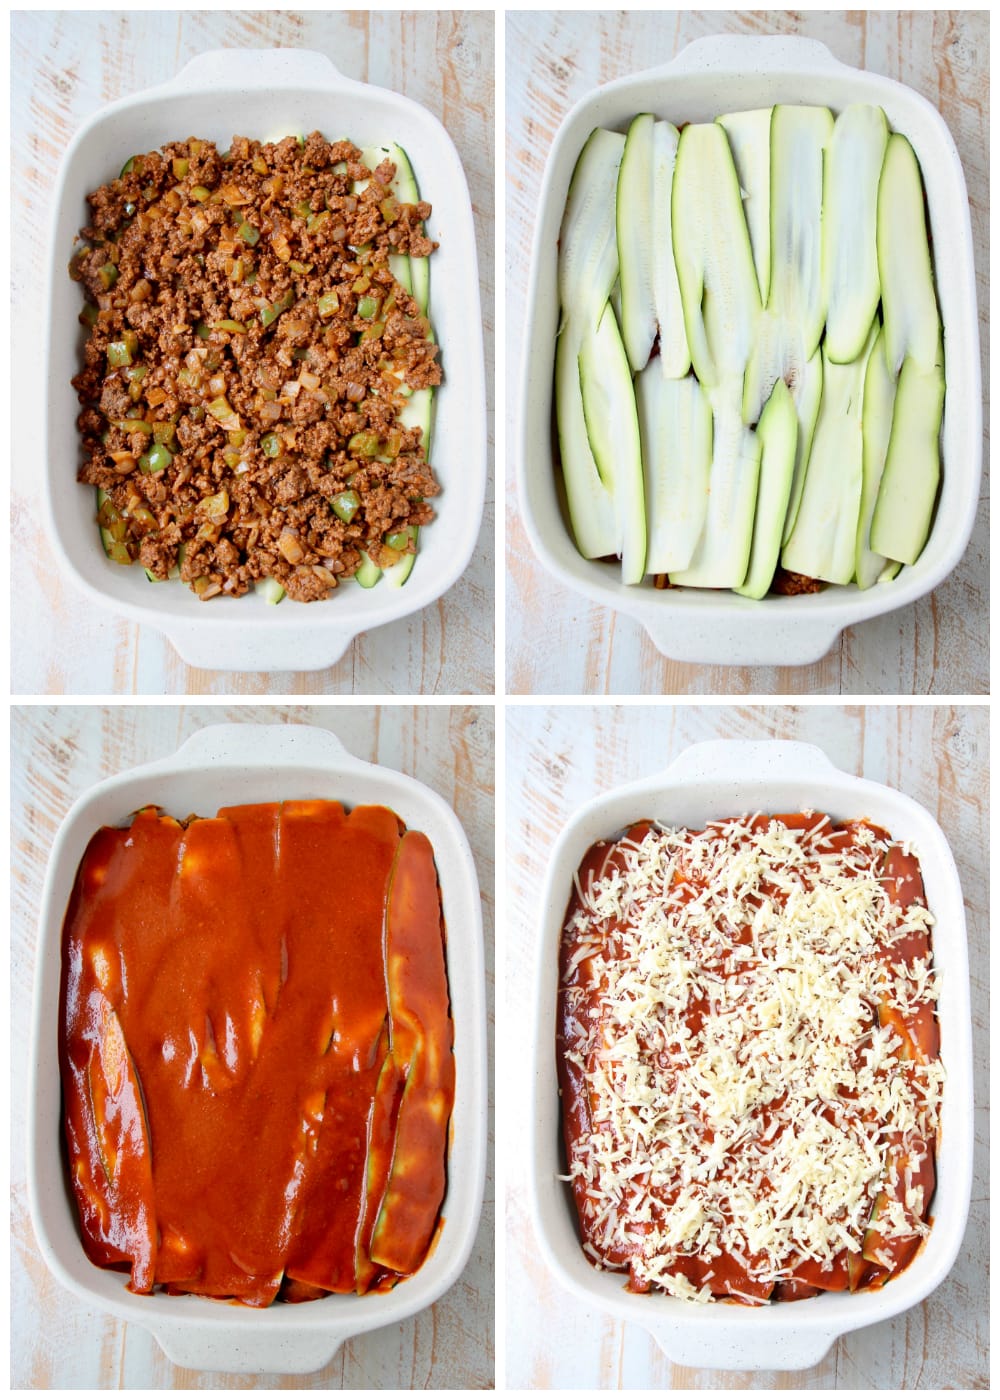 Instructional images of how to make low carb zucchini enchiladas with ground beef and red sauce